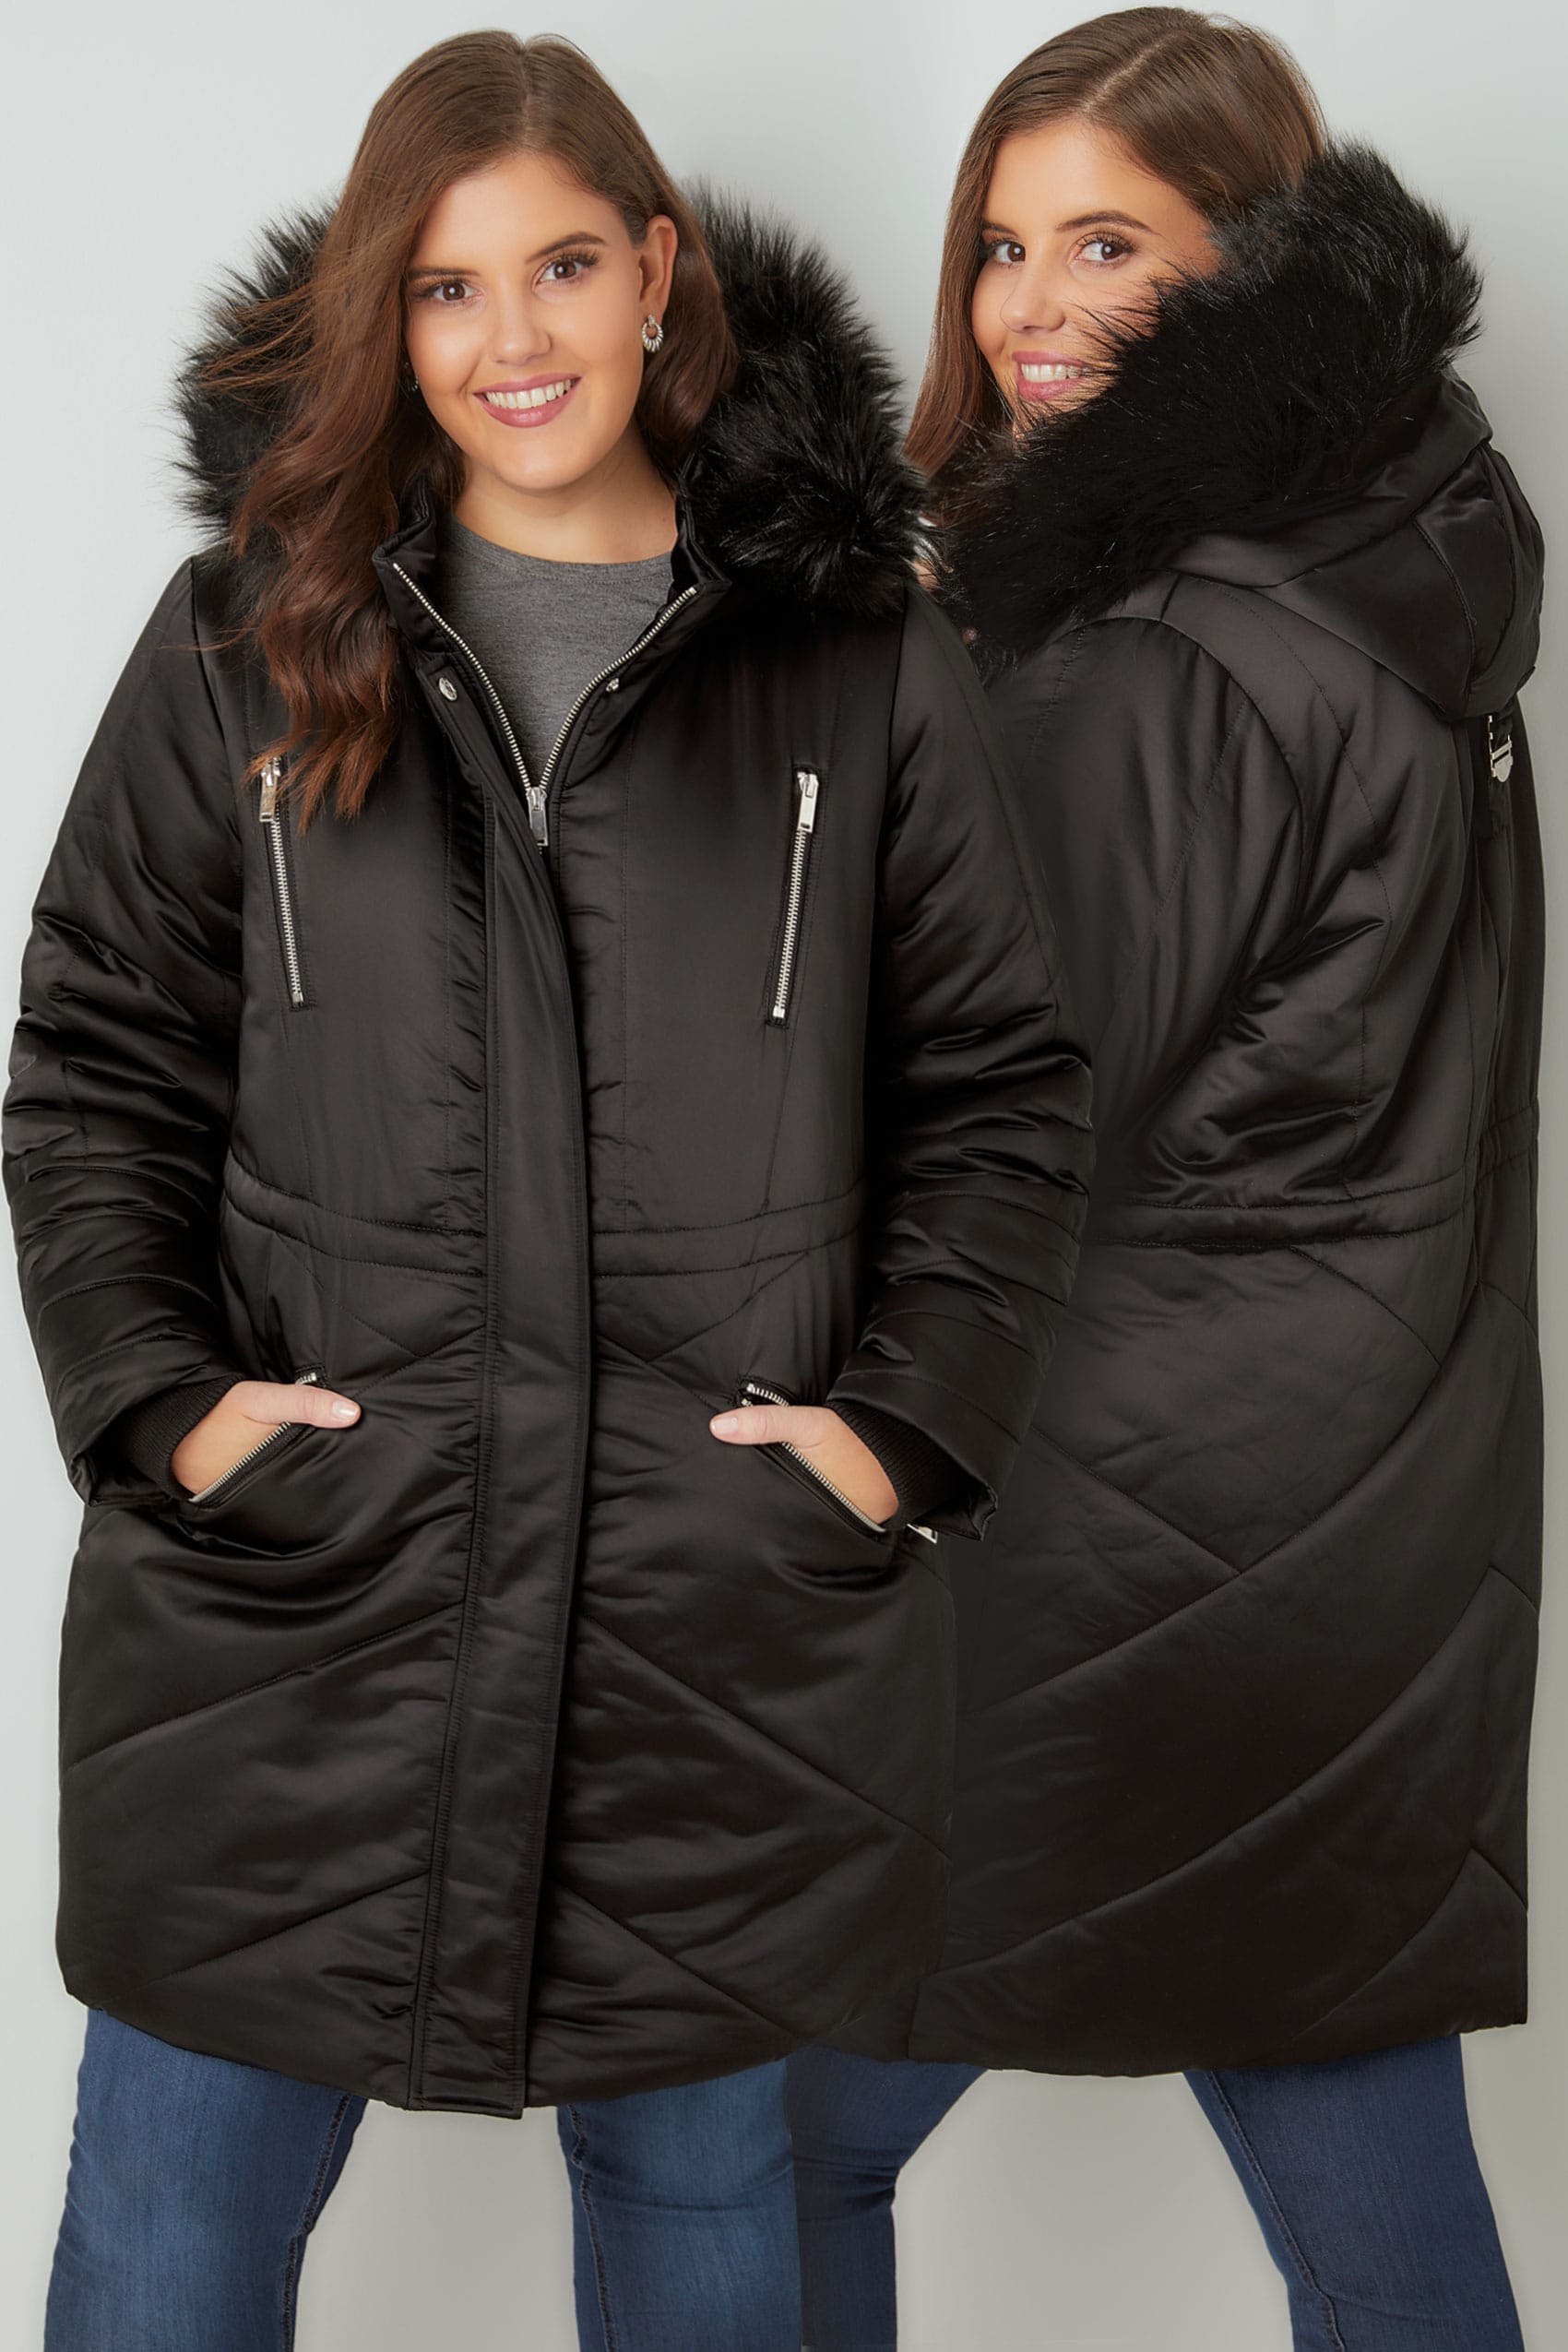 Black Padded Parka Jacket With Faux Fur Hood, Plus size 16 to 36